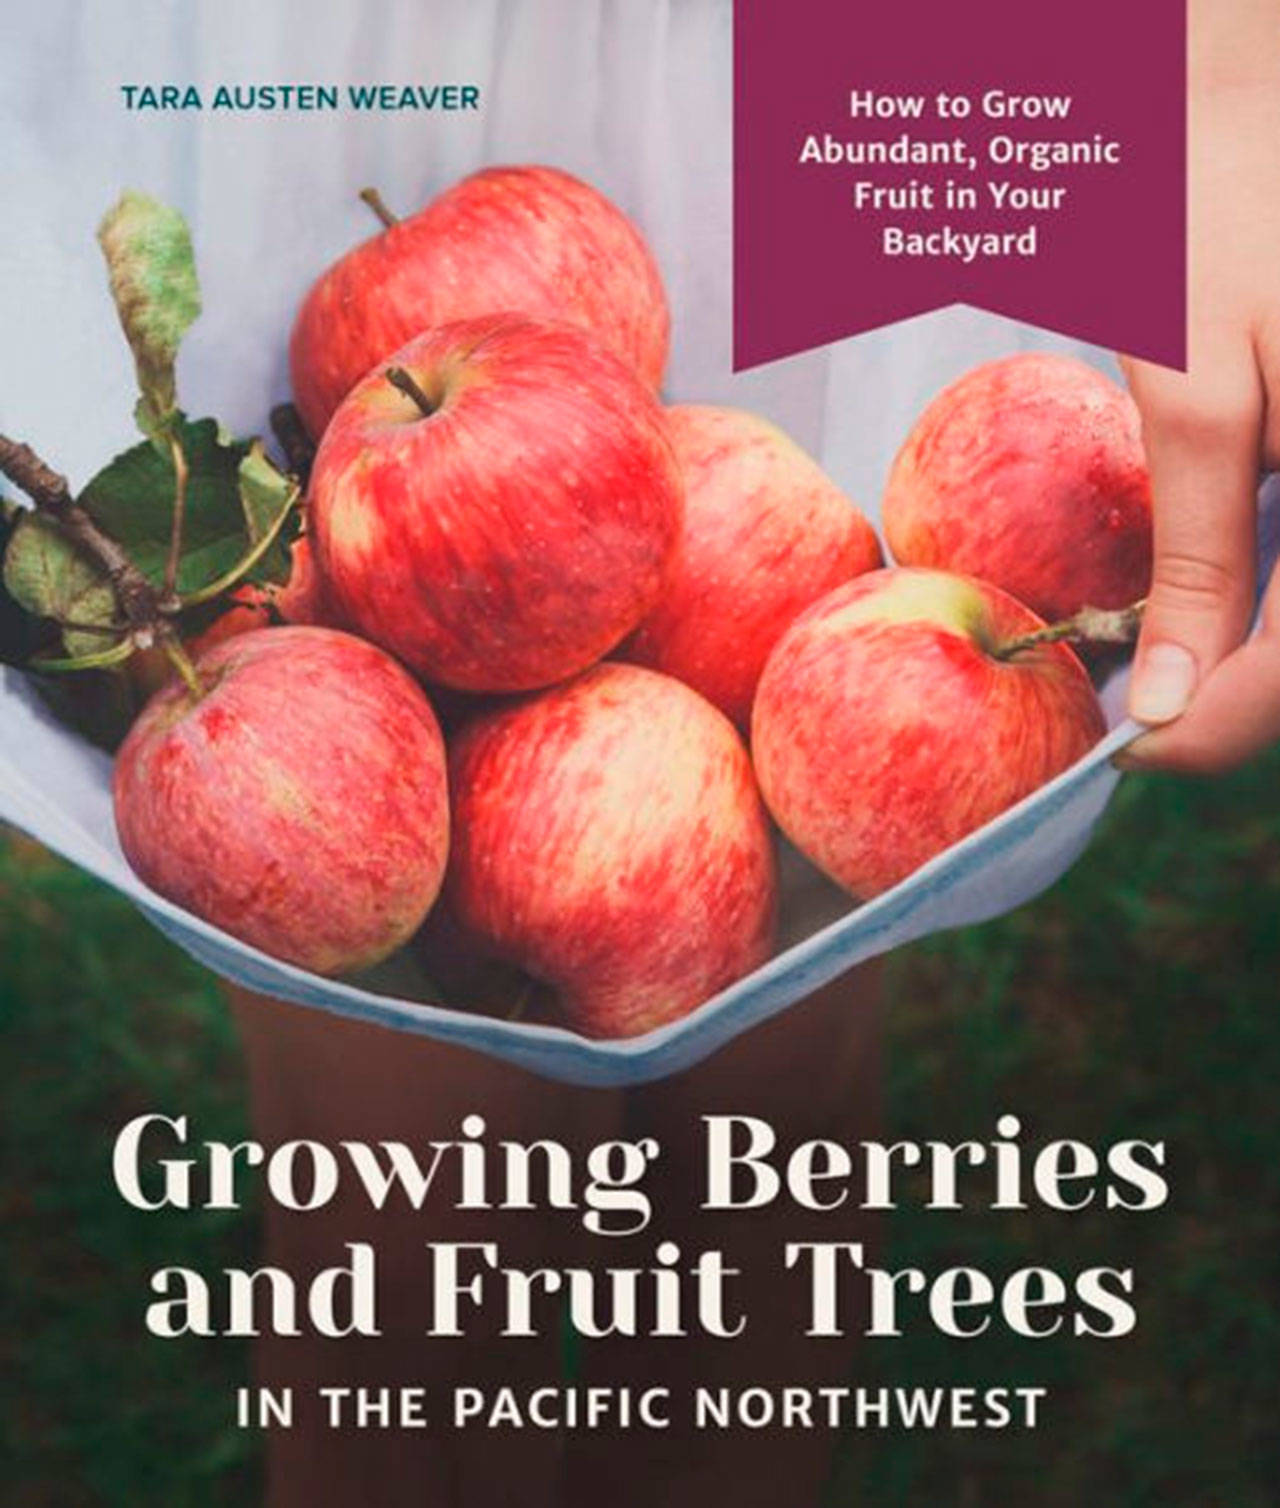 Image courtesy of Eagle Harbor Book Company | Join master gardener and cookbook author Tara Austen Weaver at Eagle Harbor Book Company at 7 p.m. Thursday, April 11 as she offers tips and tricks from her new book “Growing Berries and Fruit Trees in the Pacific Northwest: How to Grow Abundant, Organic Fruit in Your Backyard.”